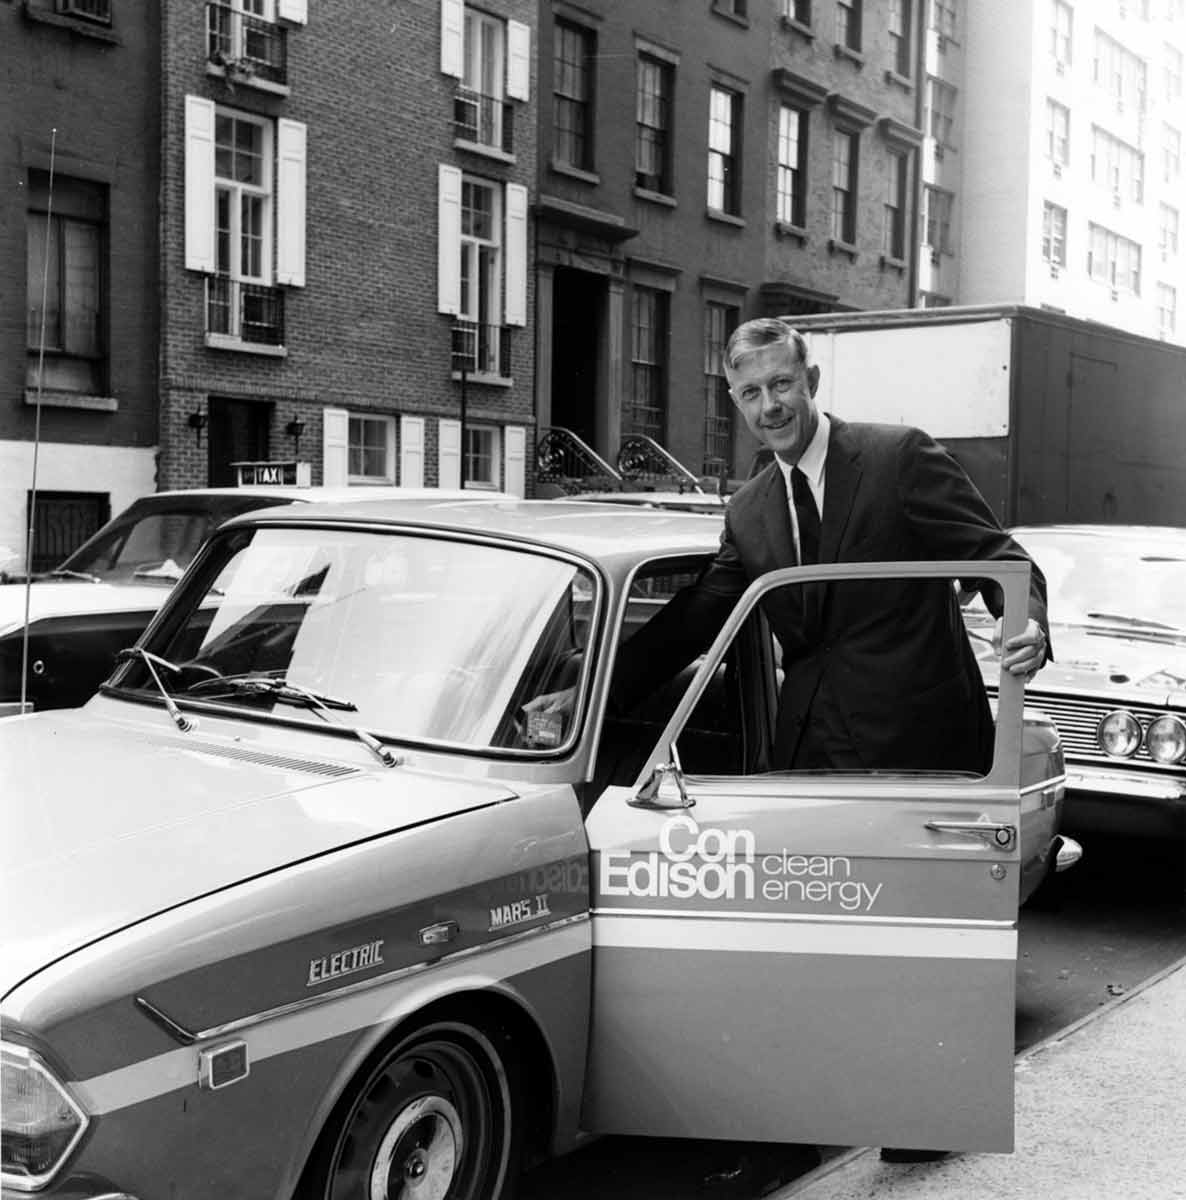 Black and white photo of a man getting into a Con Edison vehicle in New York City.